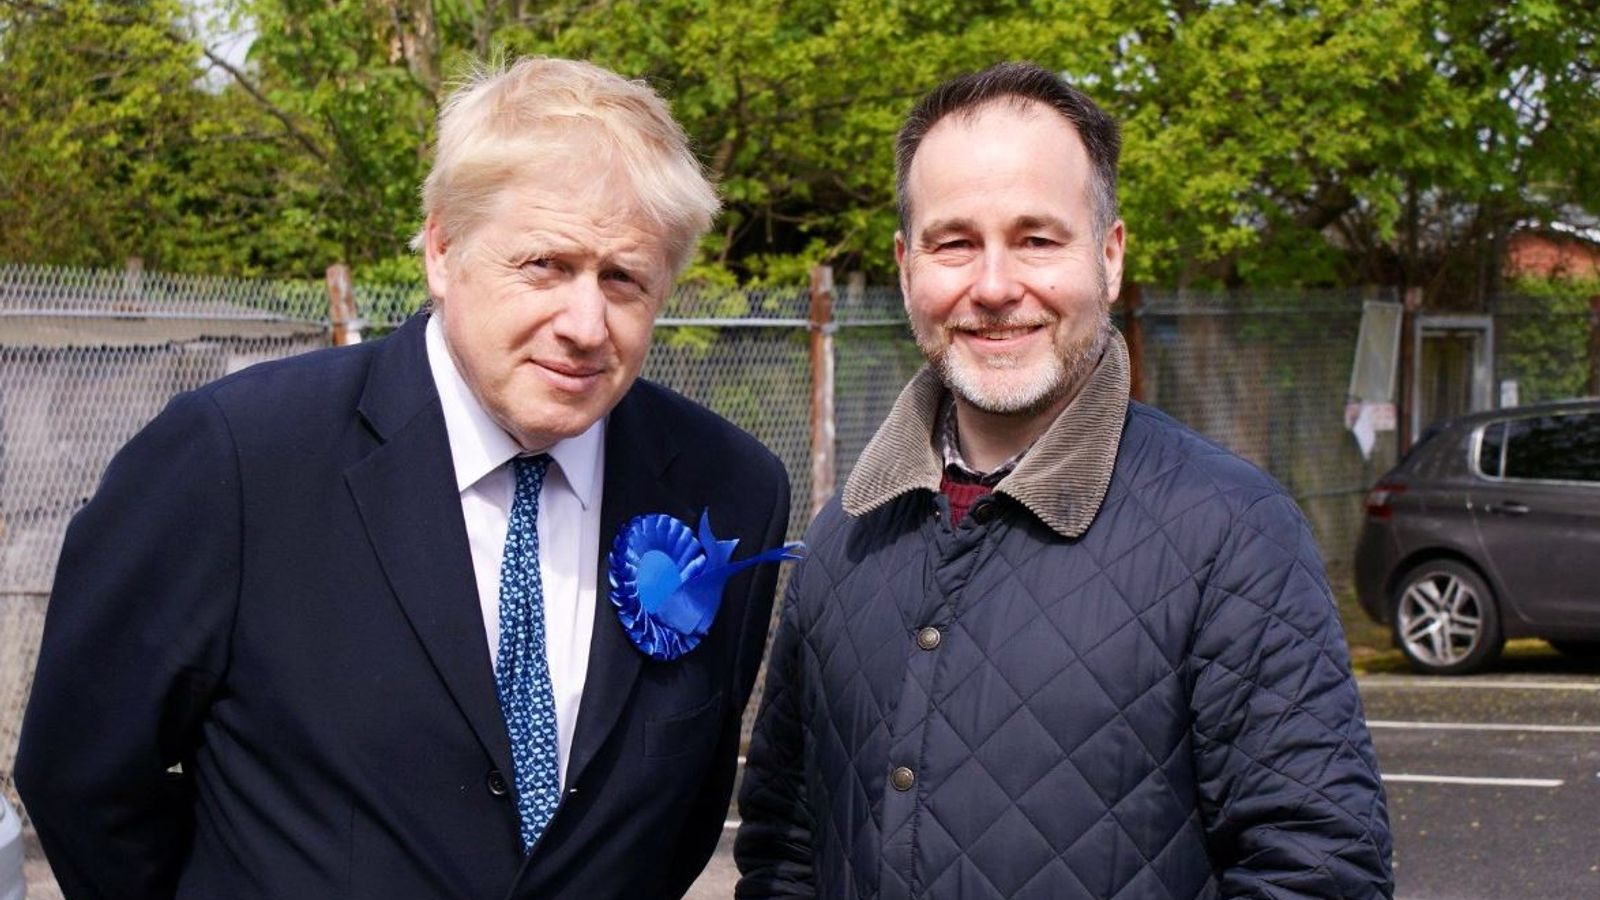 What did Boris Johnson know about Chris Pincher groping claims and when? Here's what Downing Street has said